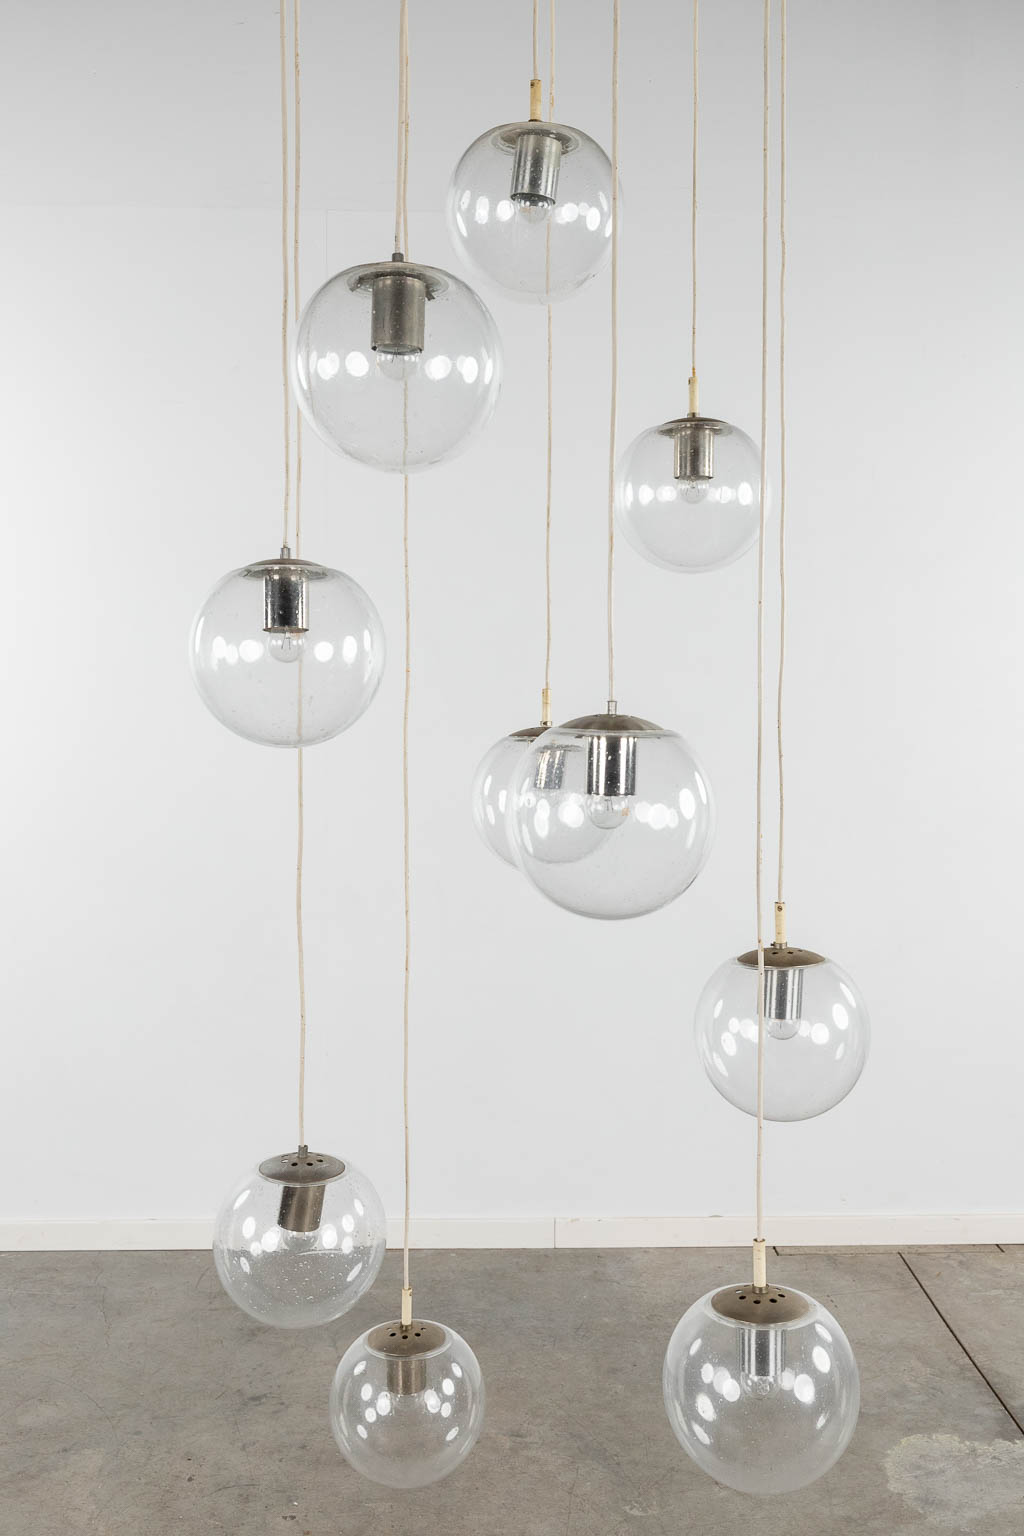 Raak, Amsterdam, a large ceiling lamp with 10 glass balls. 20th C. (D:70 cm)